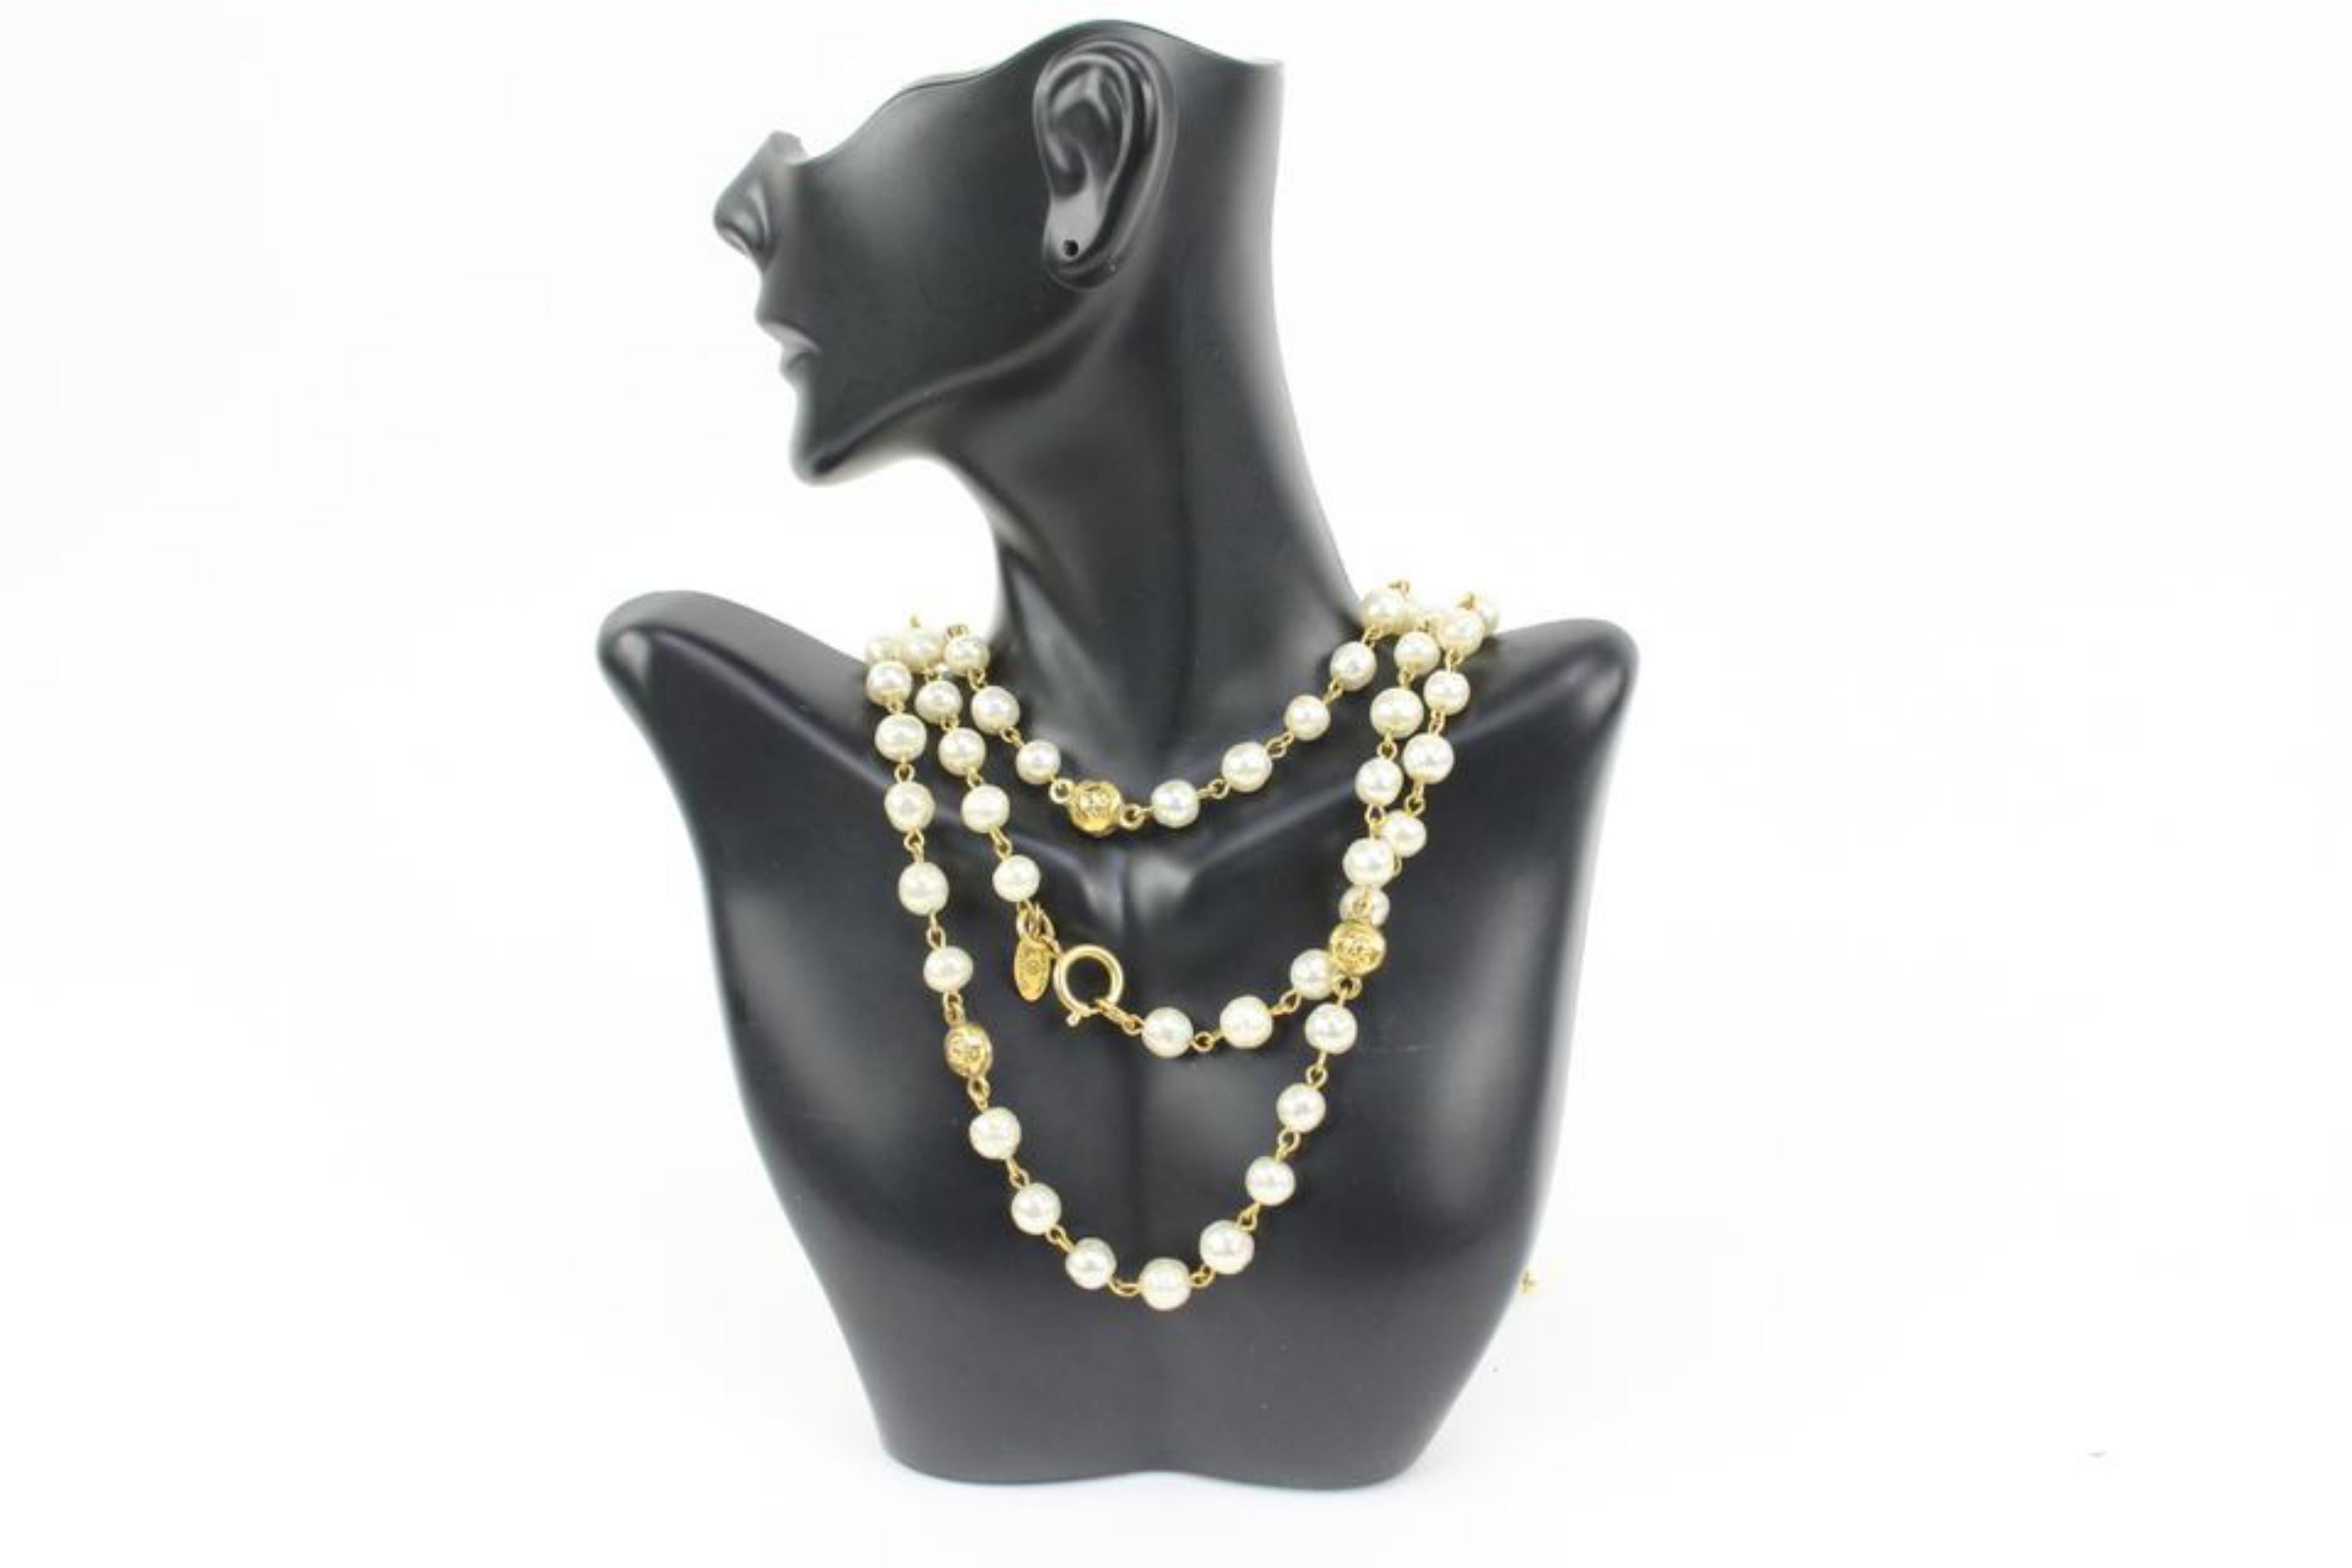 Chanel Gold Bead x Pearl Necklace 15ck311s
Made In: France
Measurements: Length:  69.5